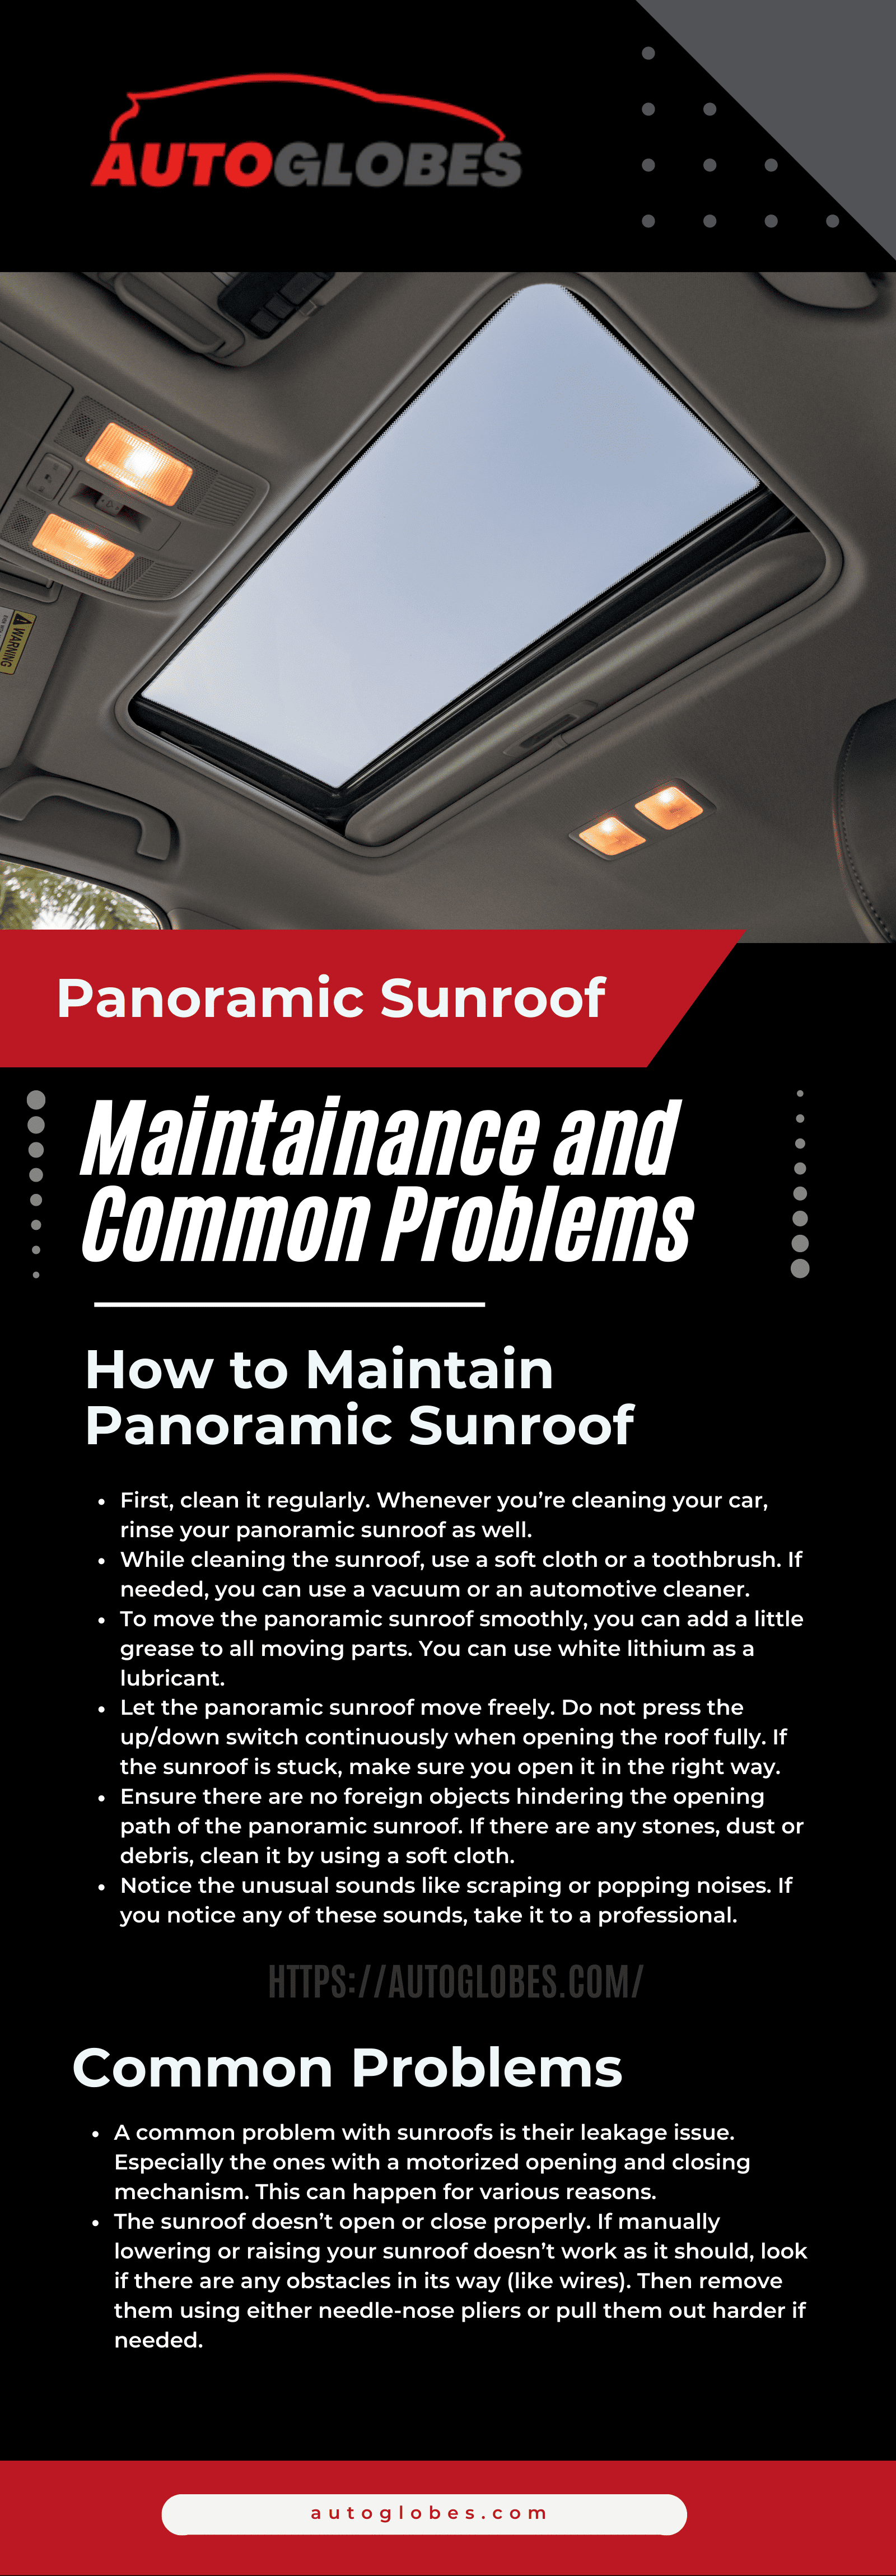 Panoramic Sunroof Maintenance and Common Problems Infographic